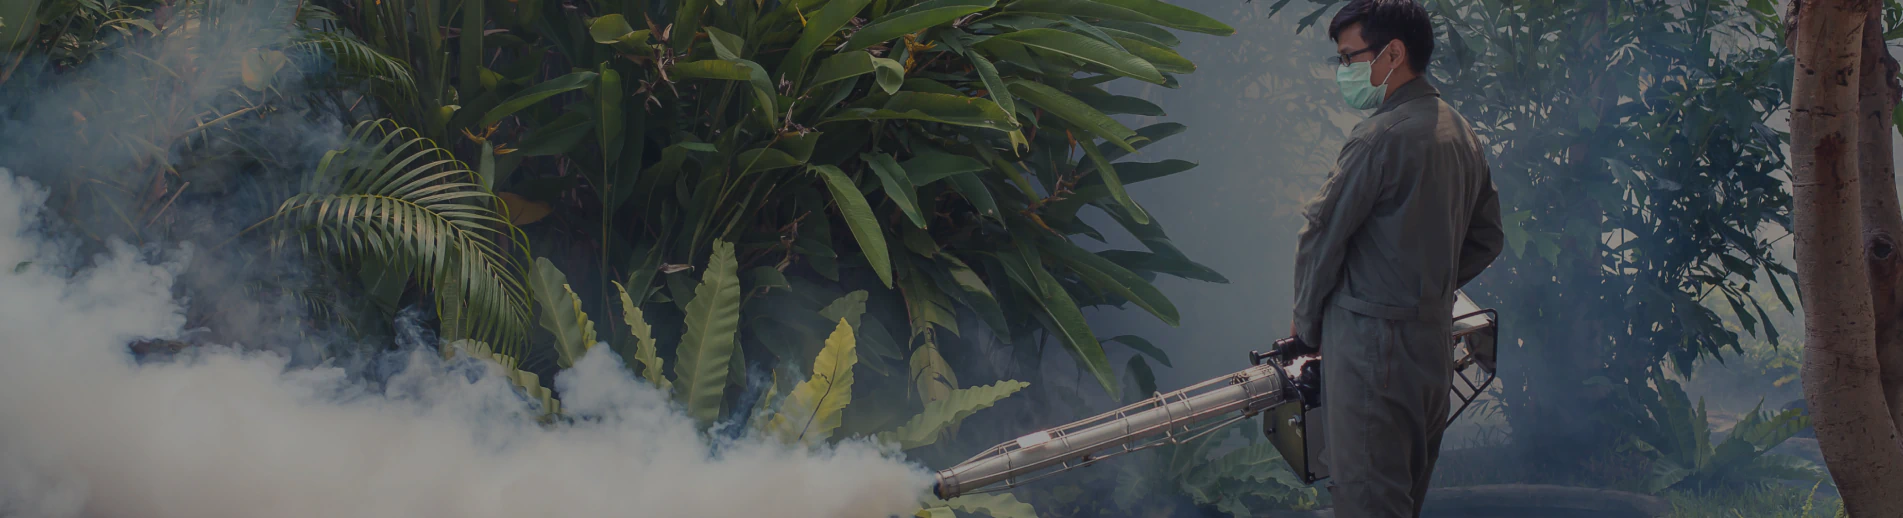 worker fogging the backyard to eliminate mosquito